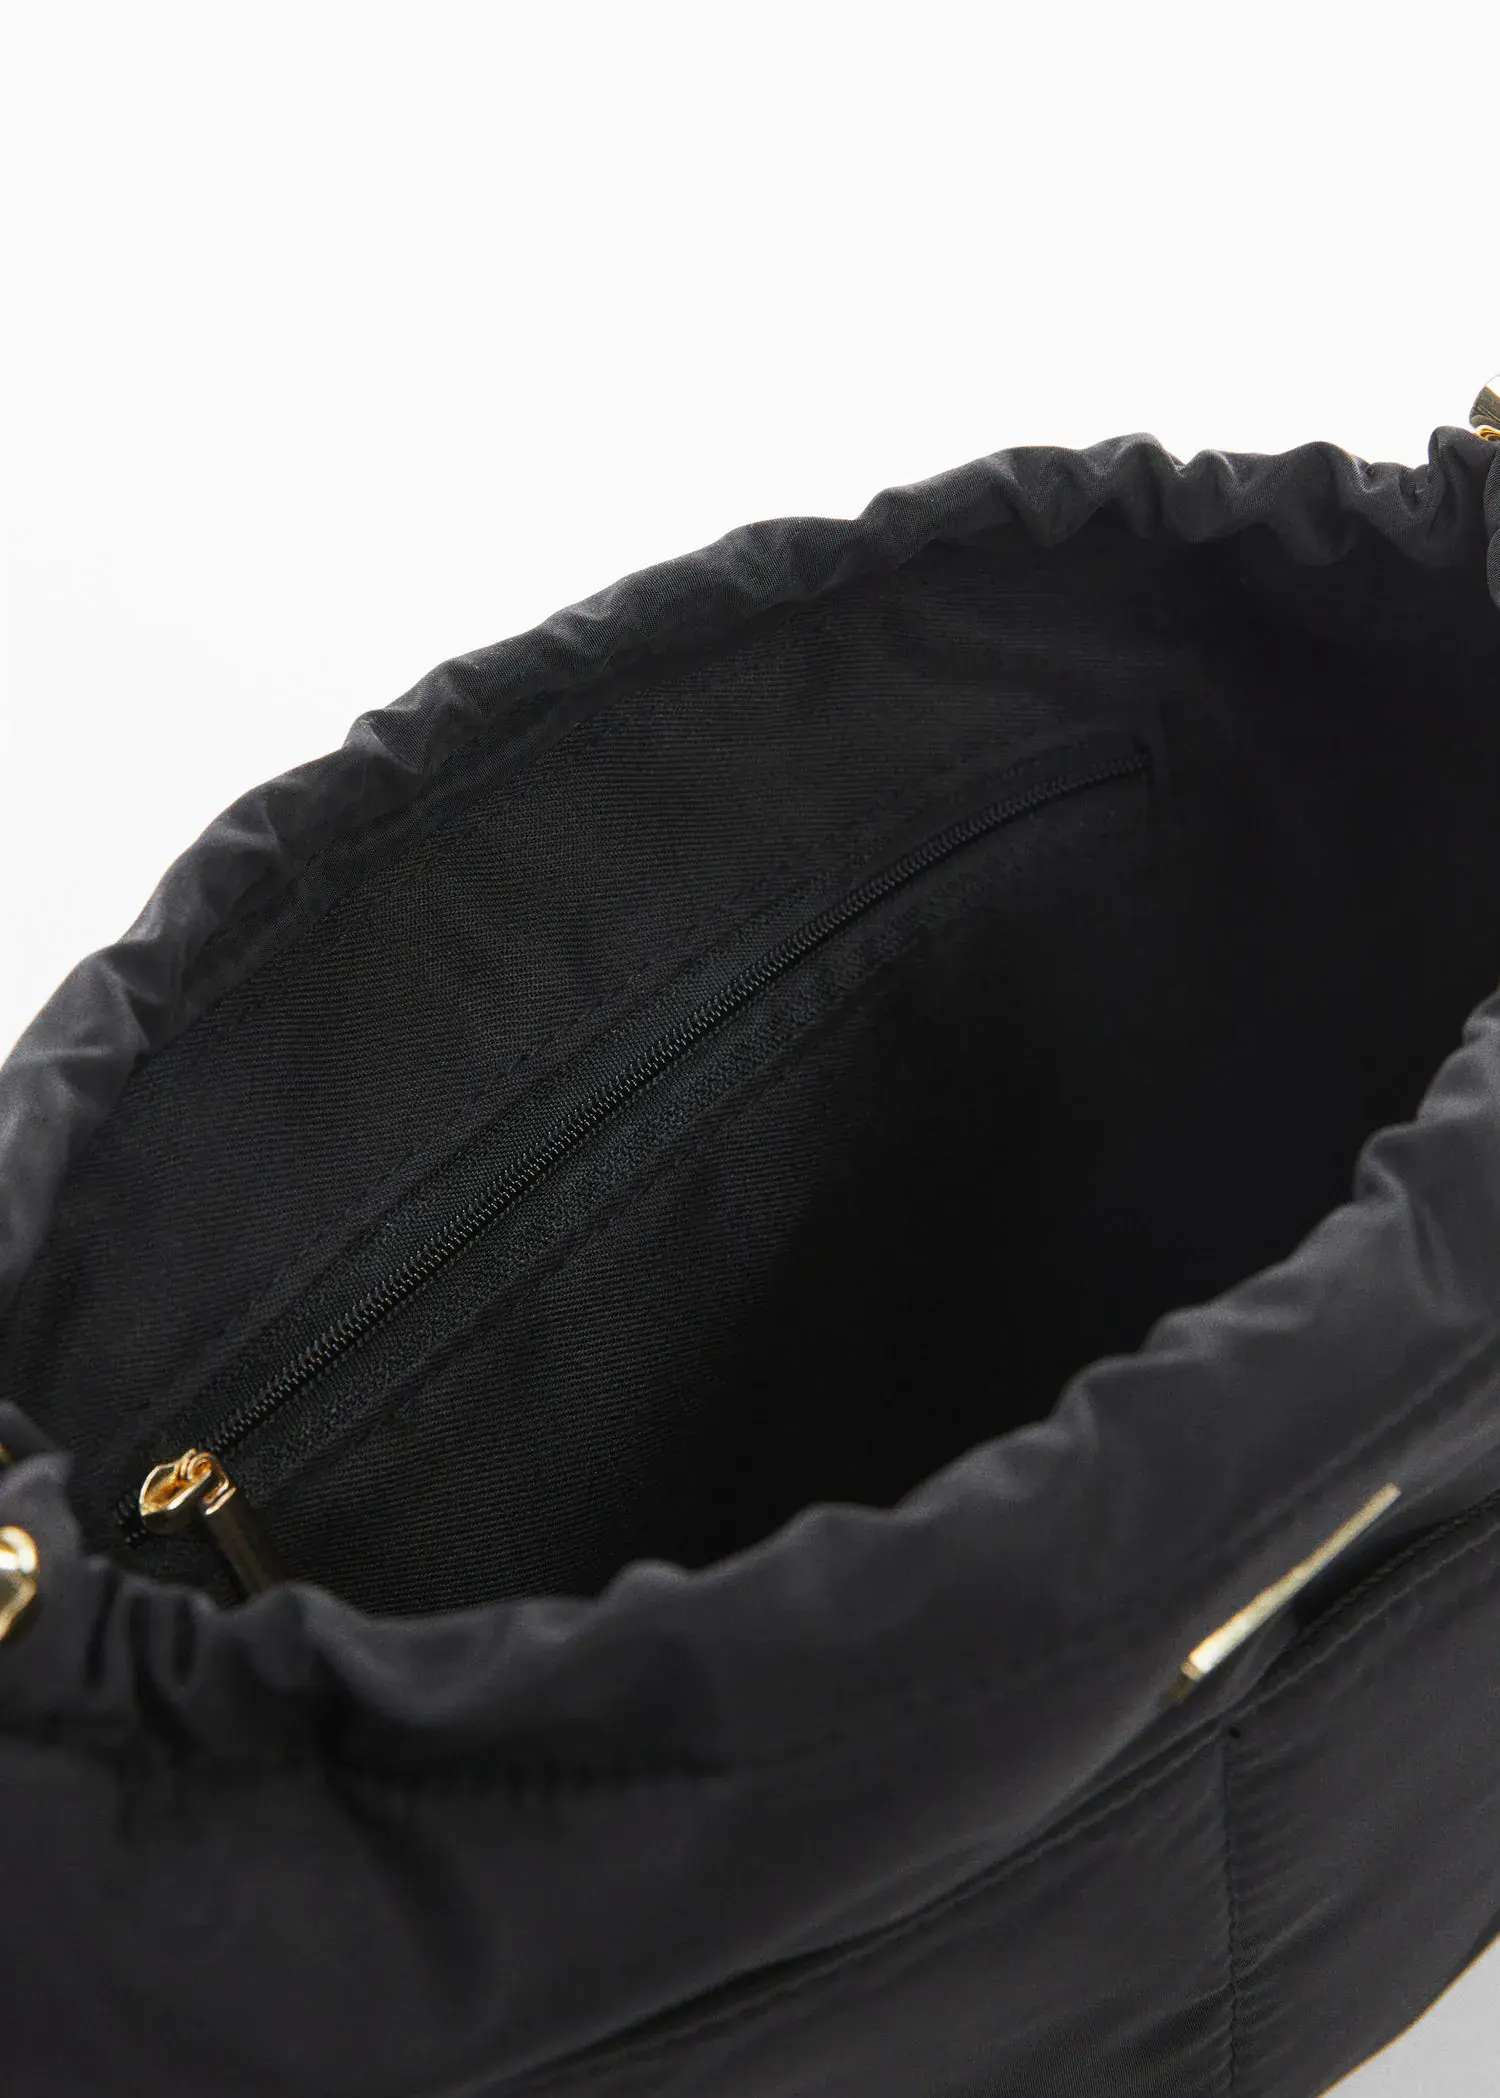 Mango Leather bowling bag. a close-up view of the inside of a black purse. 